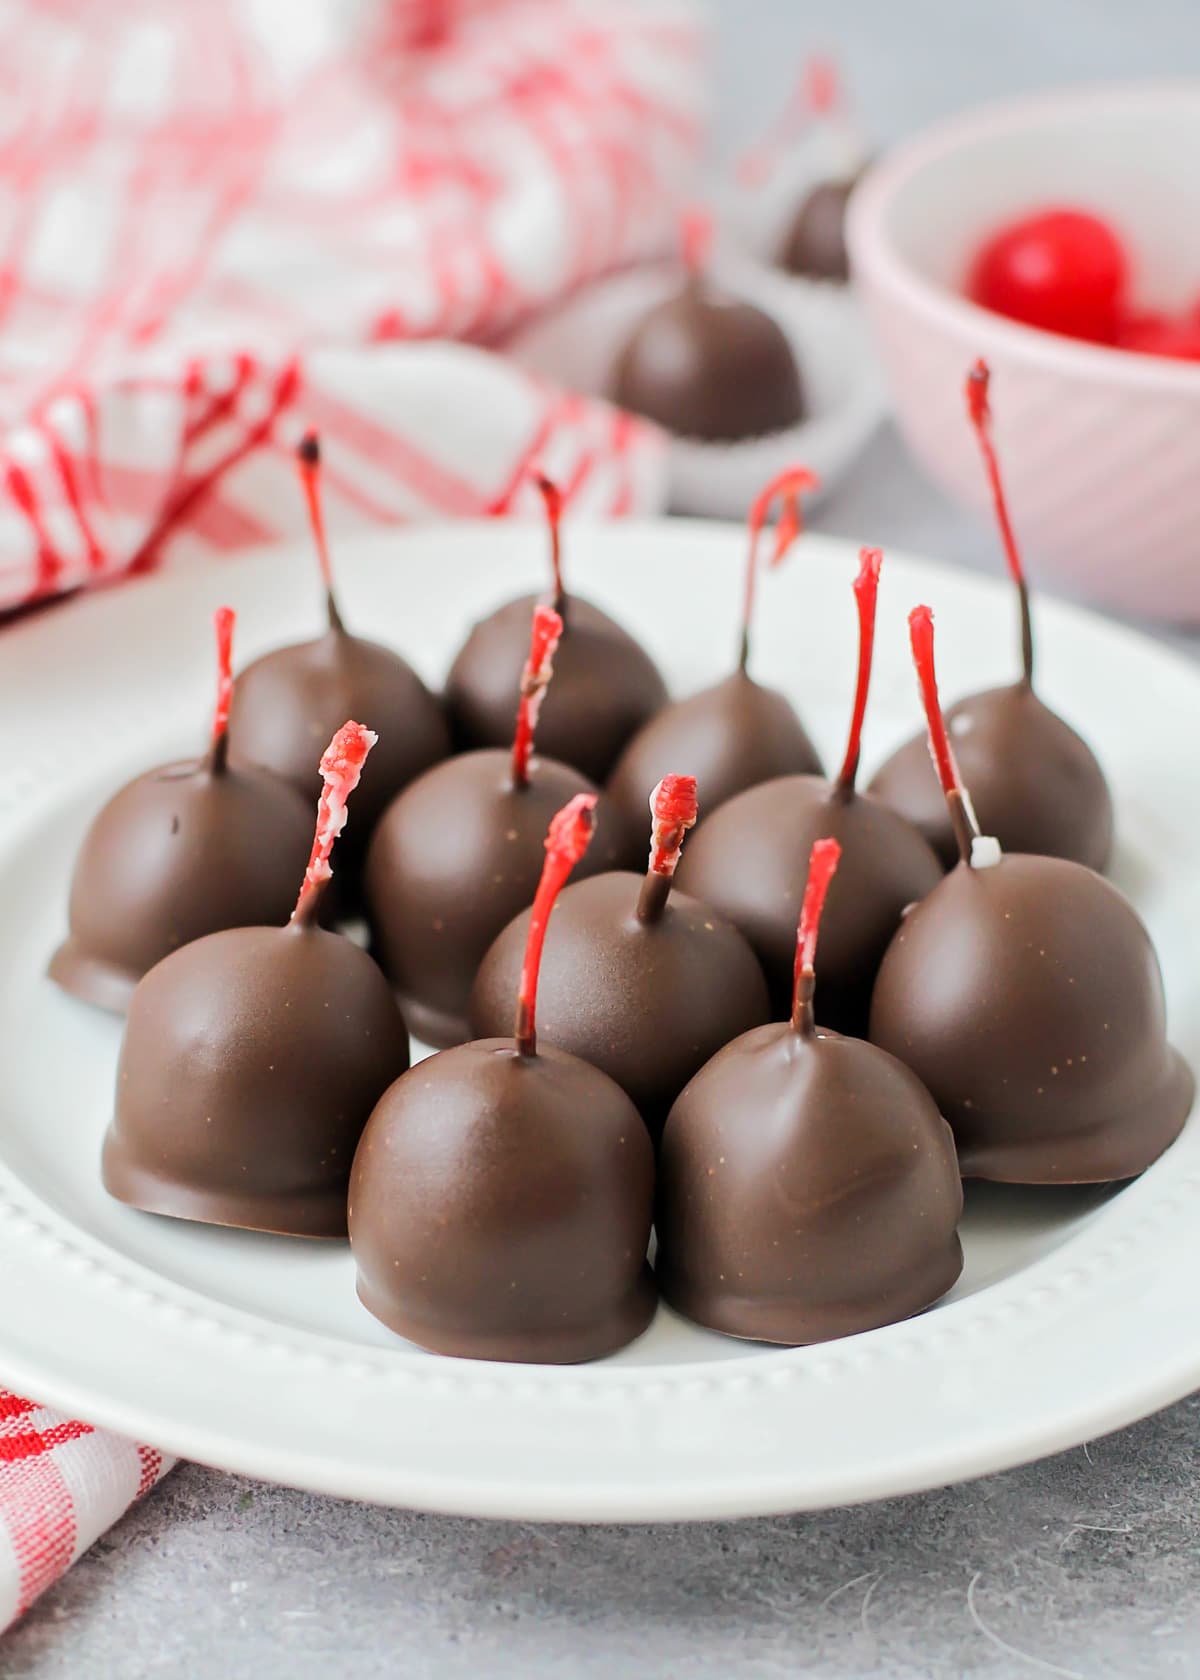 Close up of chocolate covered cherries on a white plate.